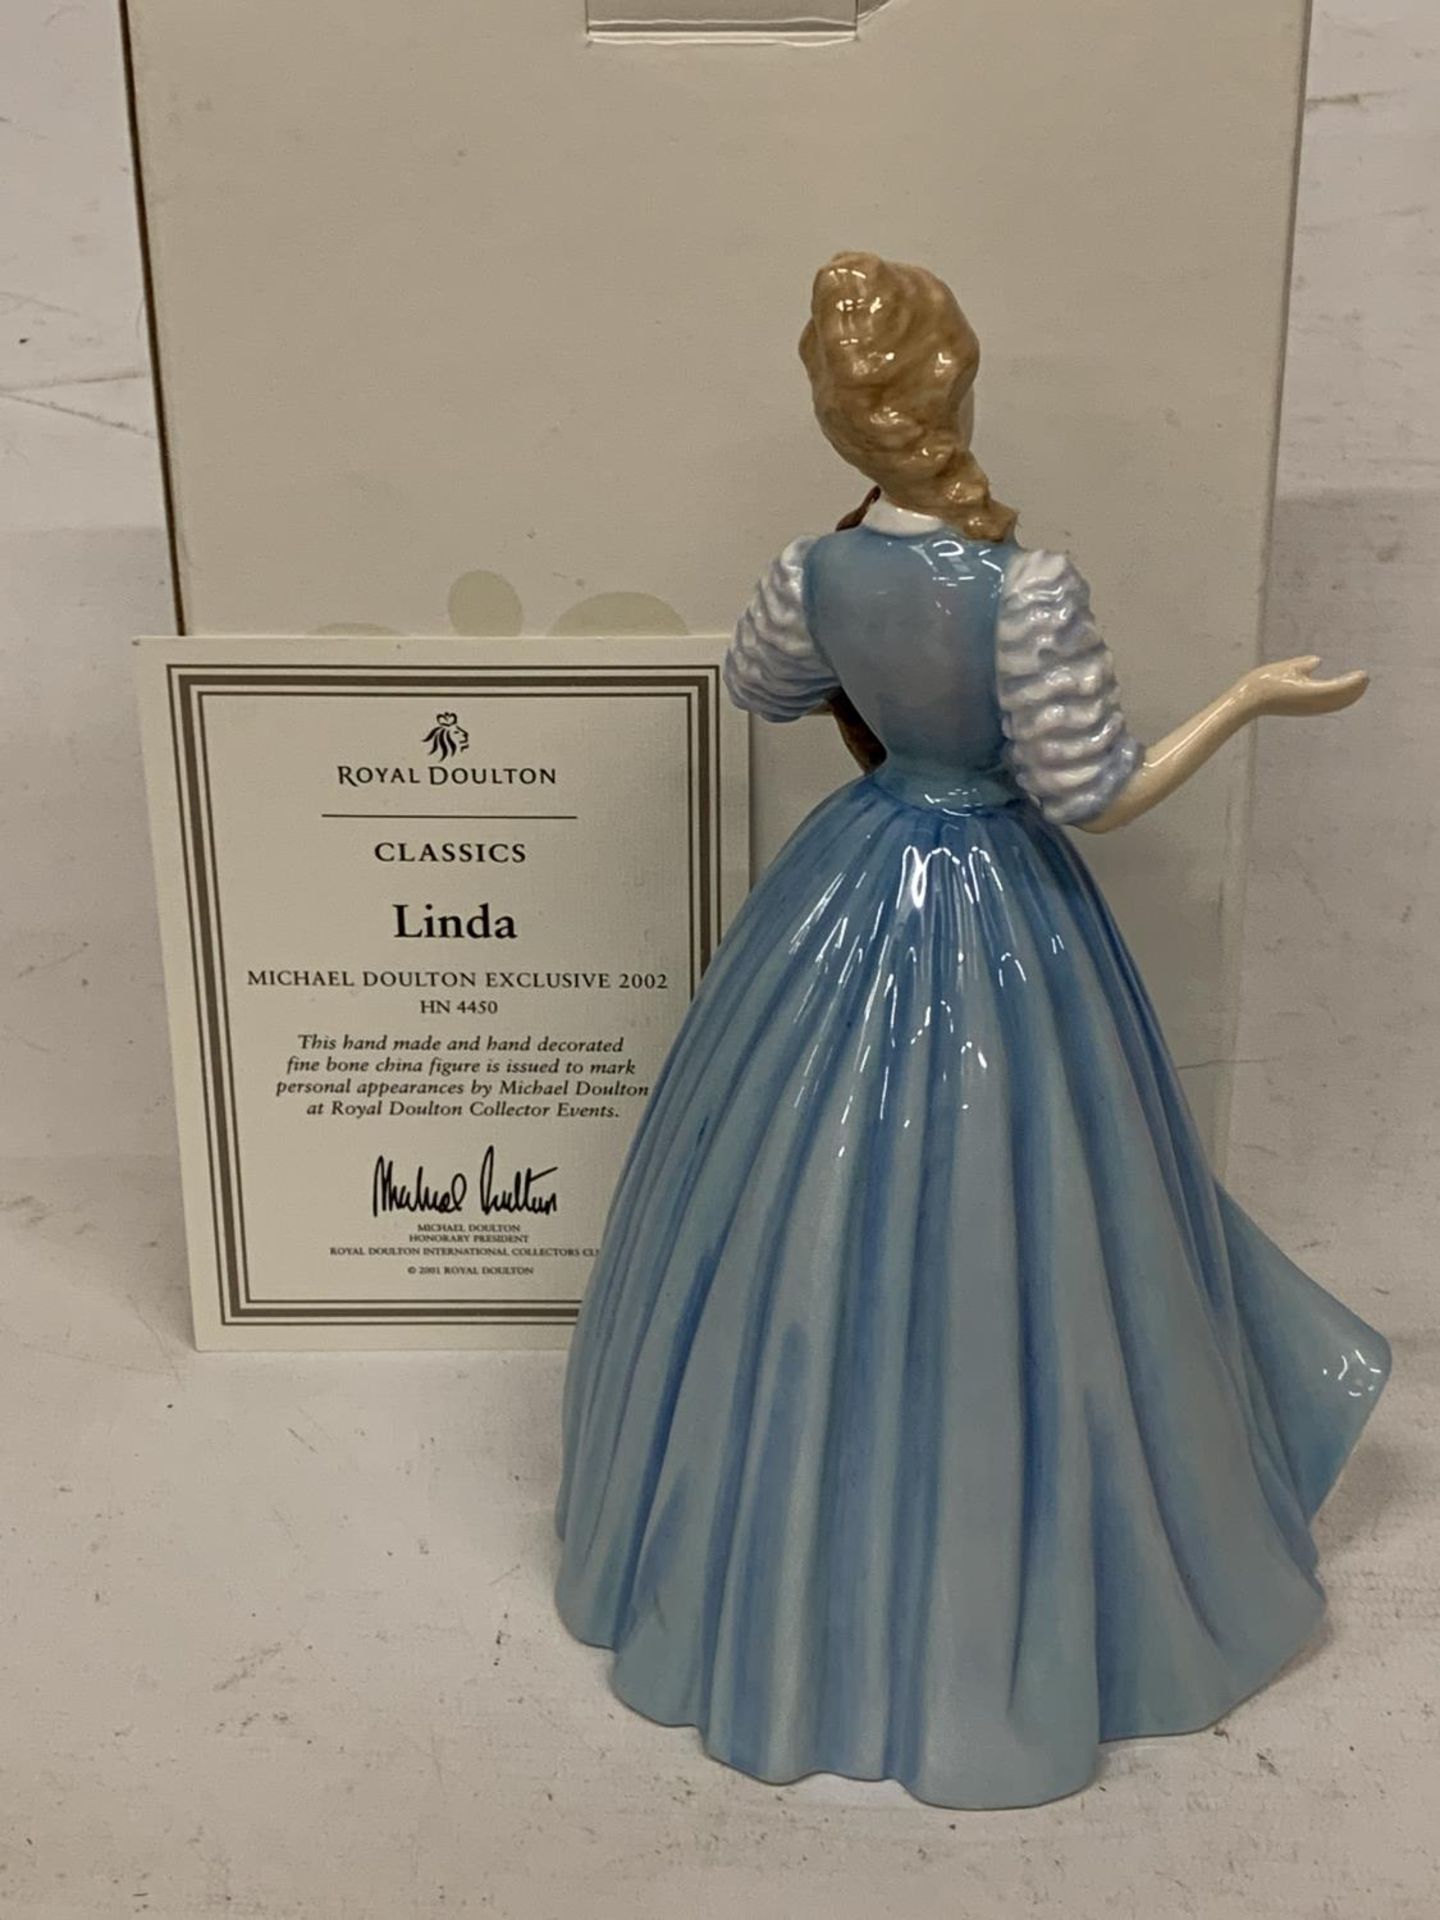 A BOXED ROYAL DOULTON FIGURINE "LINDA" A MICHAEL DOULTON EXCLUSIVE 2002 HN 4450 WITH CERTIFICATE AND - Image 2 of 3